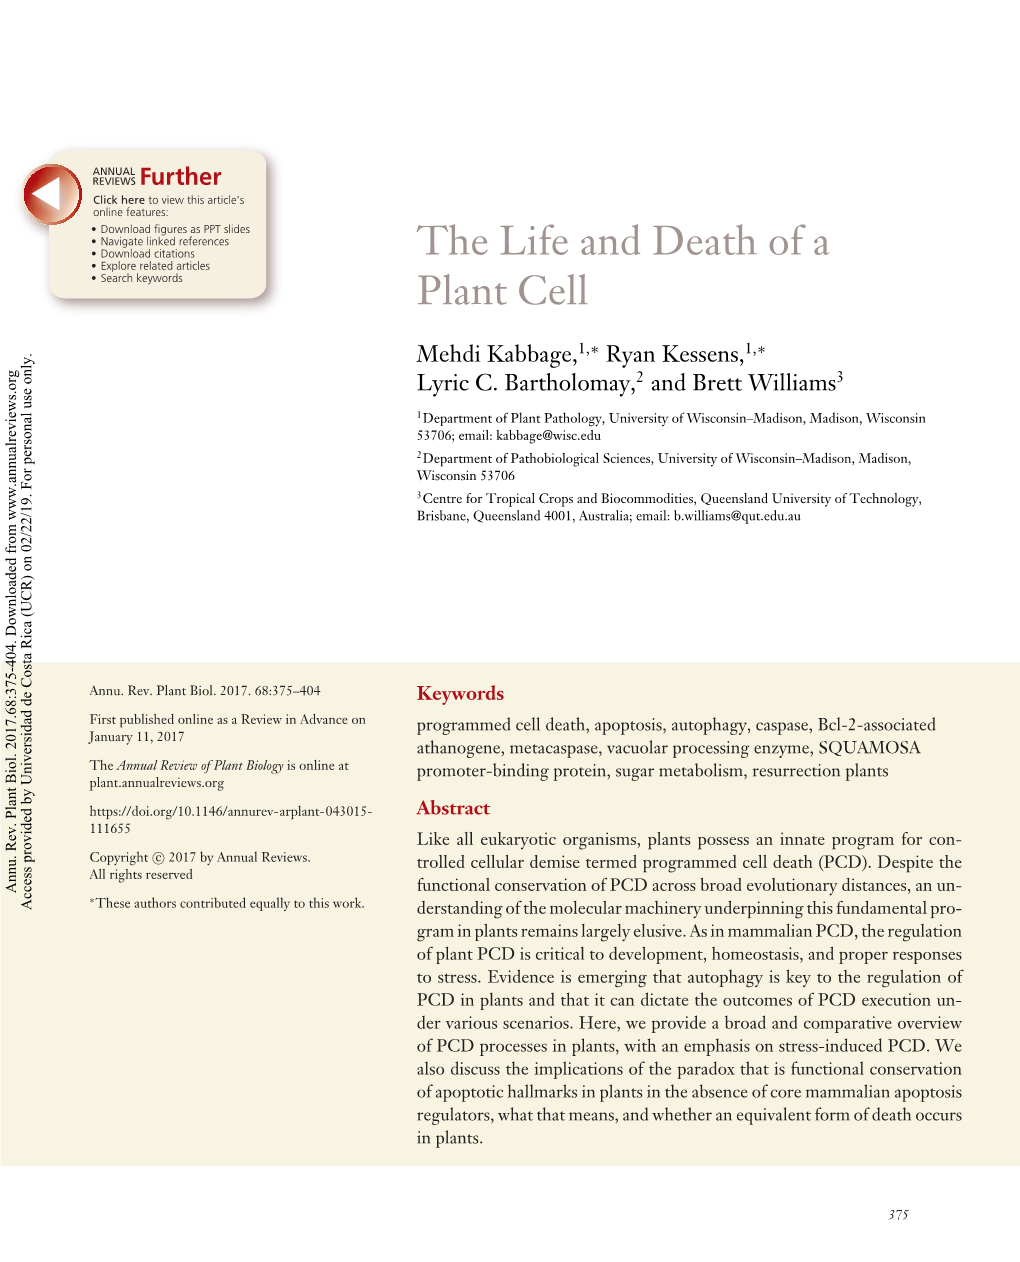 The Life and Death of a Plant Cell 377 PP68CH14-Kabbage ARI 6 April 2017 10:33